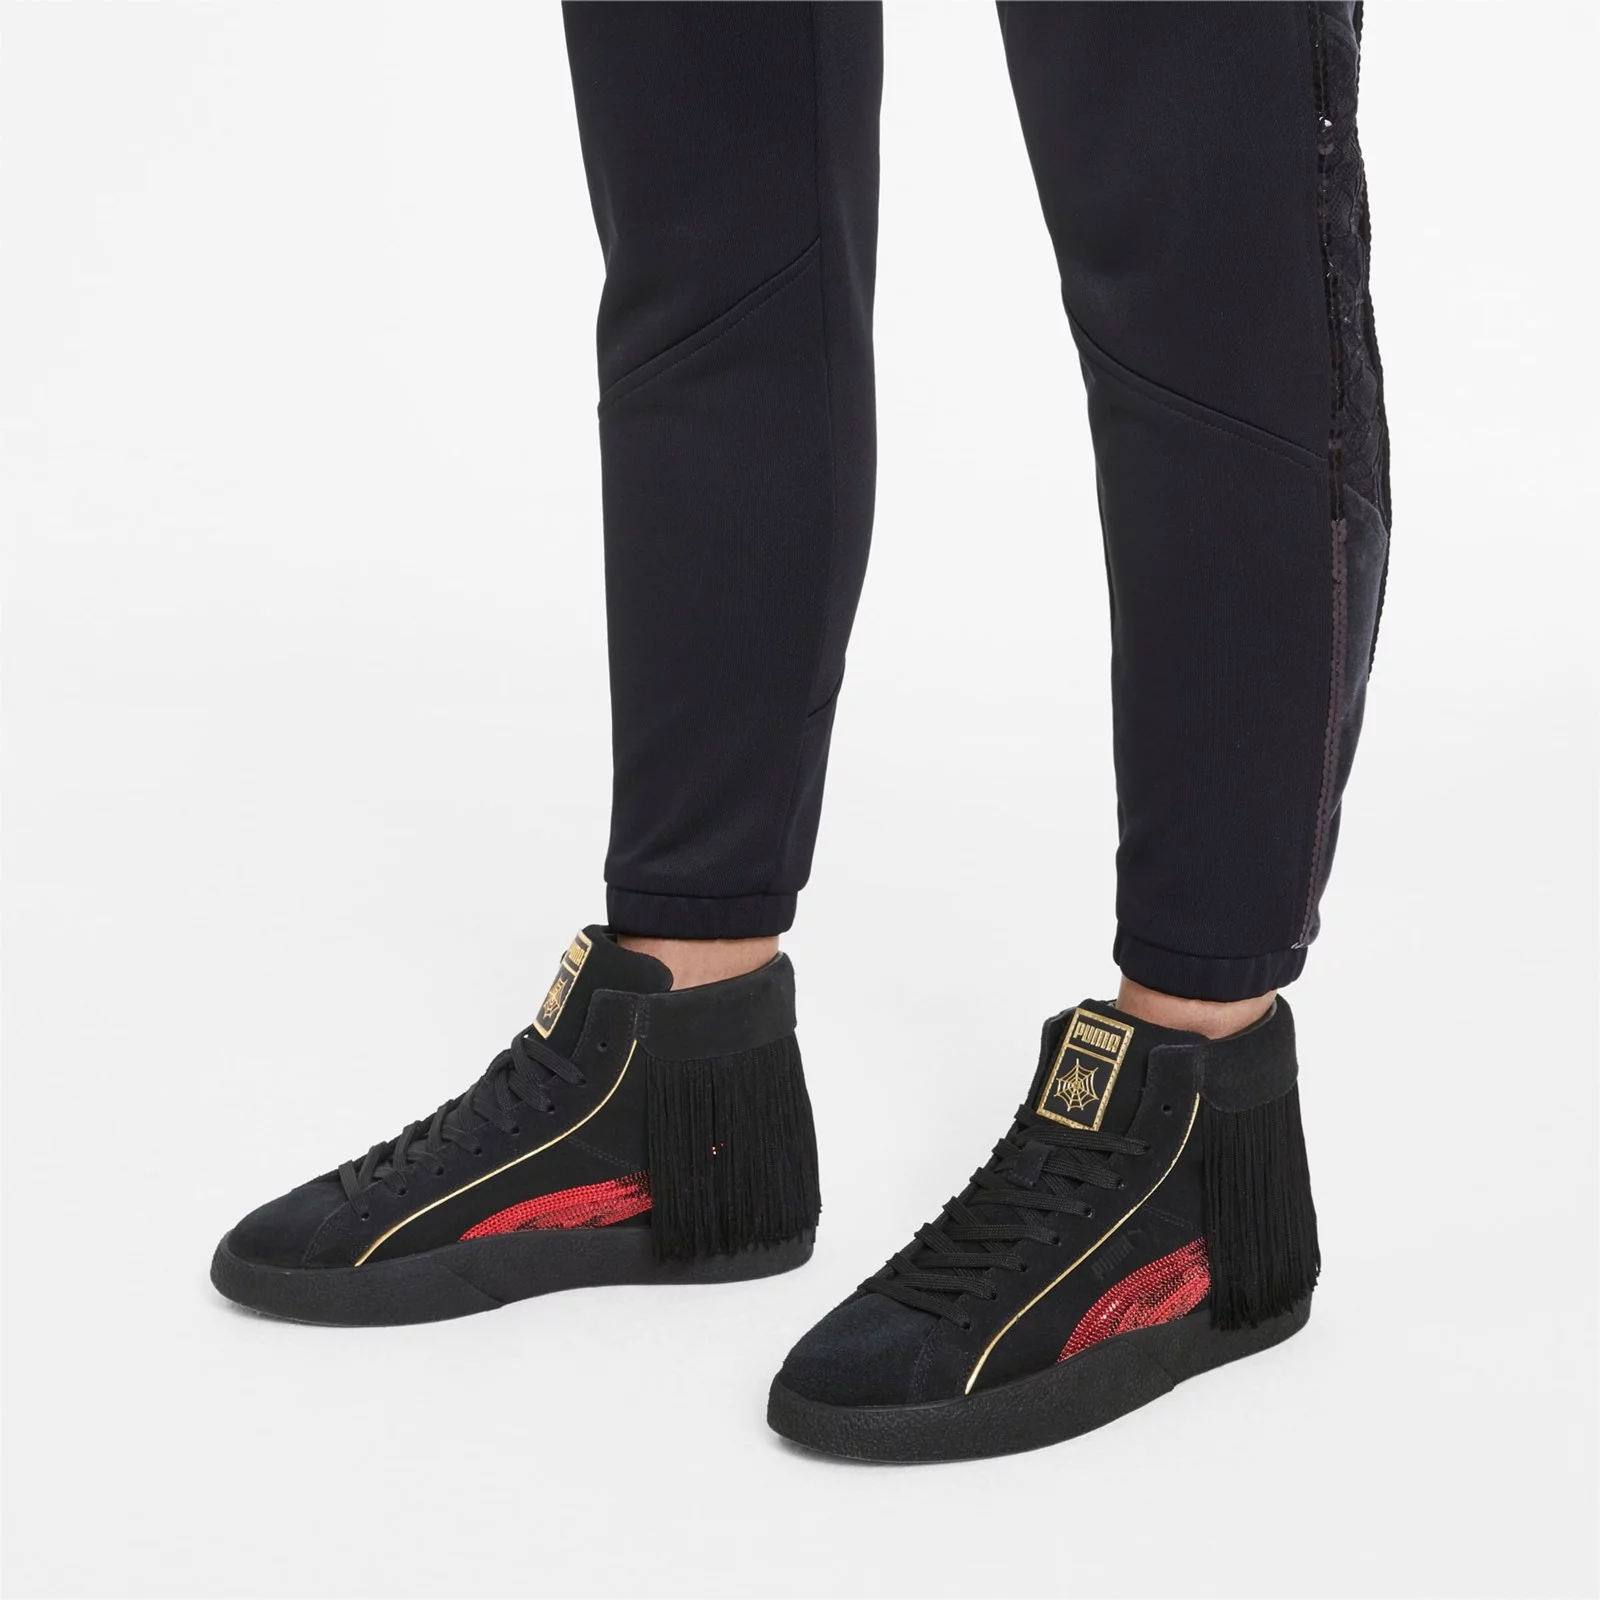 PUMA X Charlotte Olympia Love Charlotte in Black Womens Shoes Trainers High-top trainers 